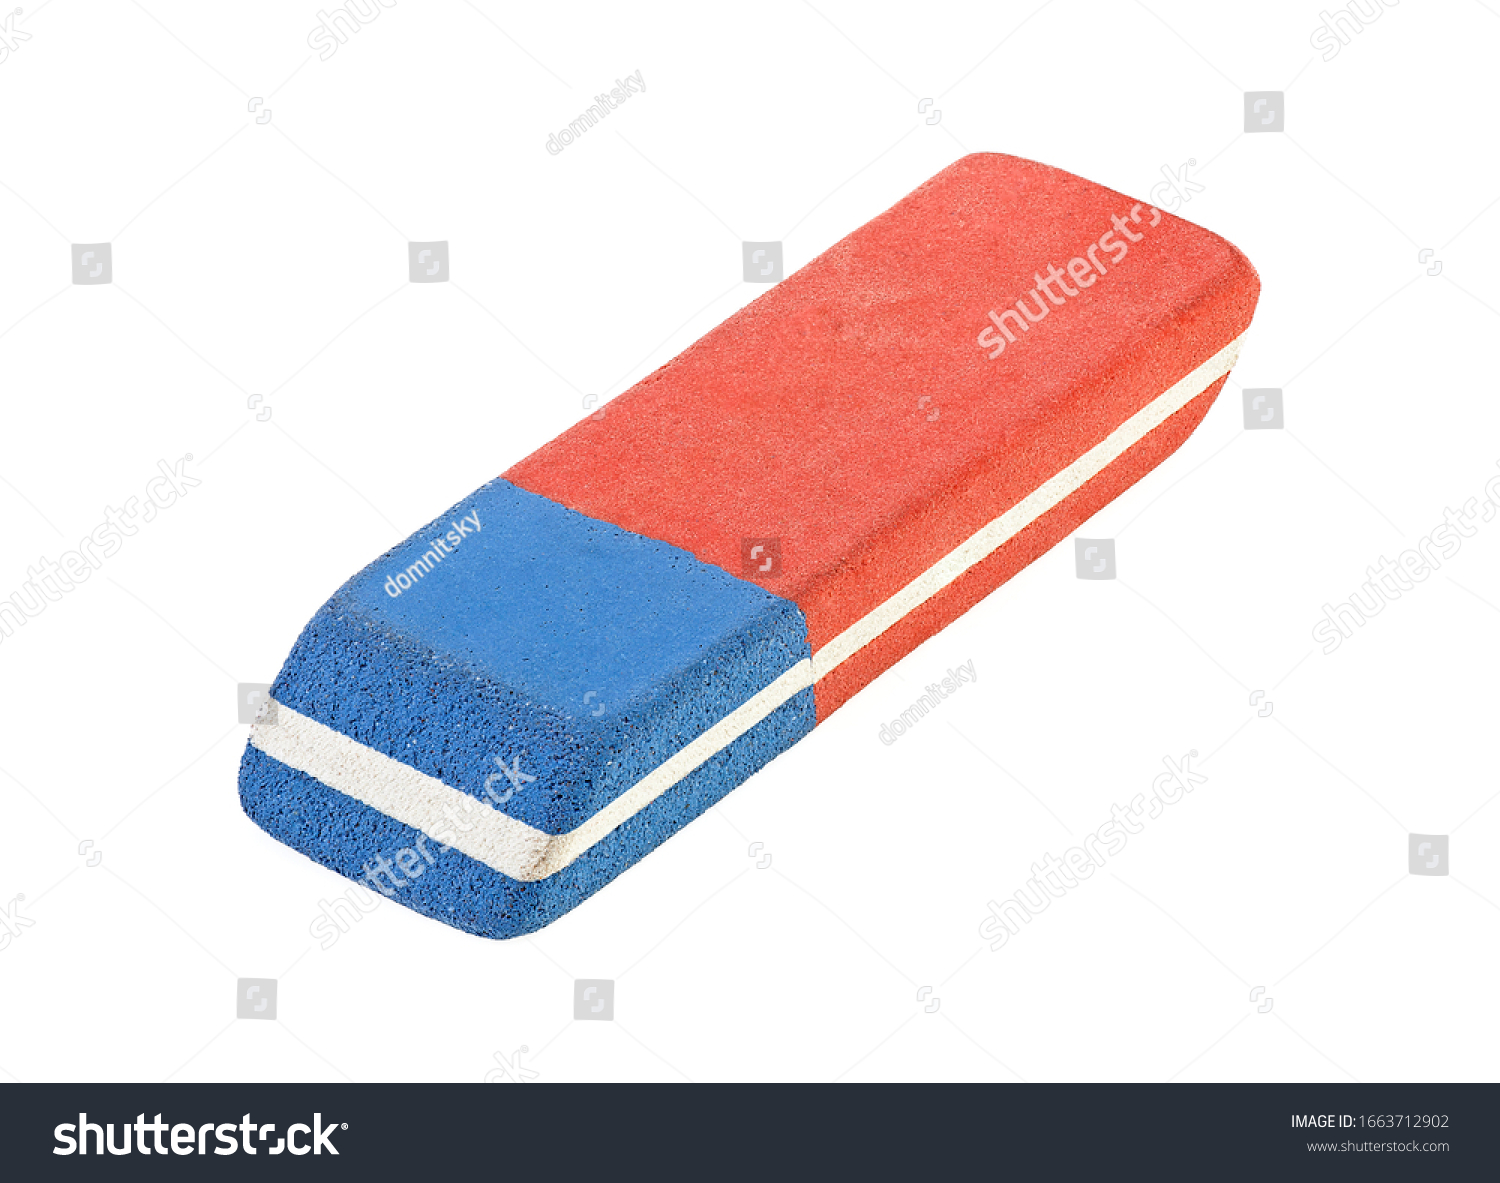 Rubber eraser for pencil and ink pen isolated on a white background, close up. #1663712902